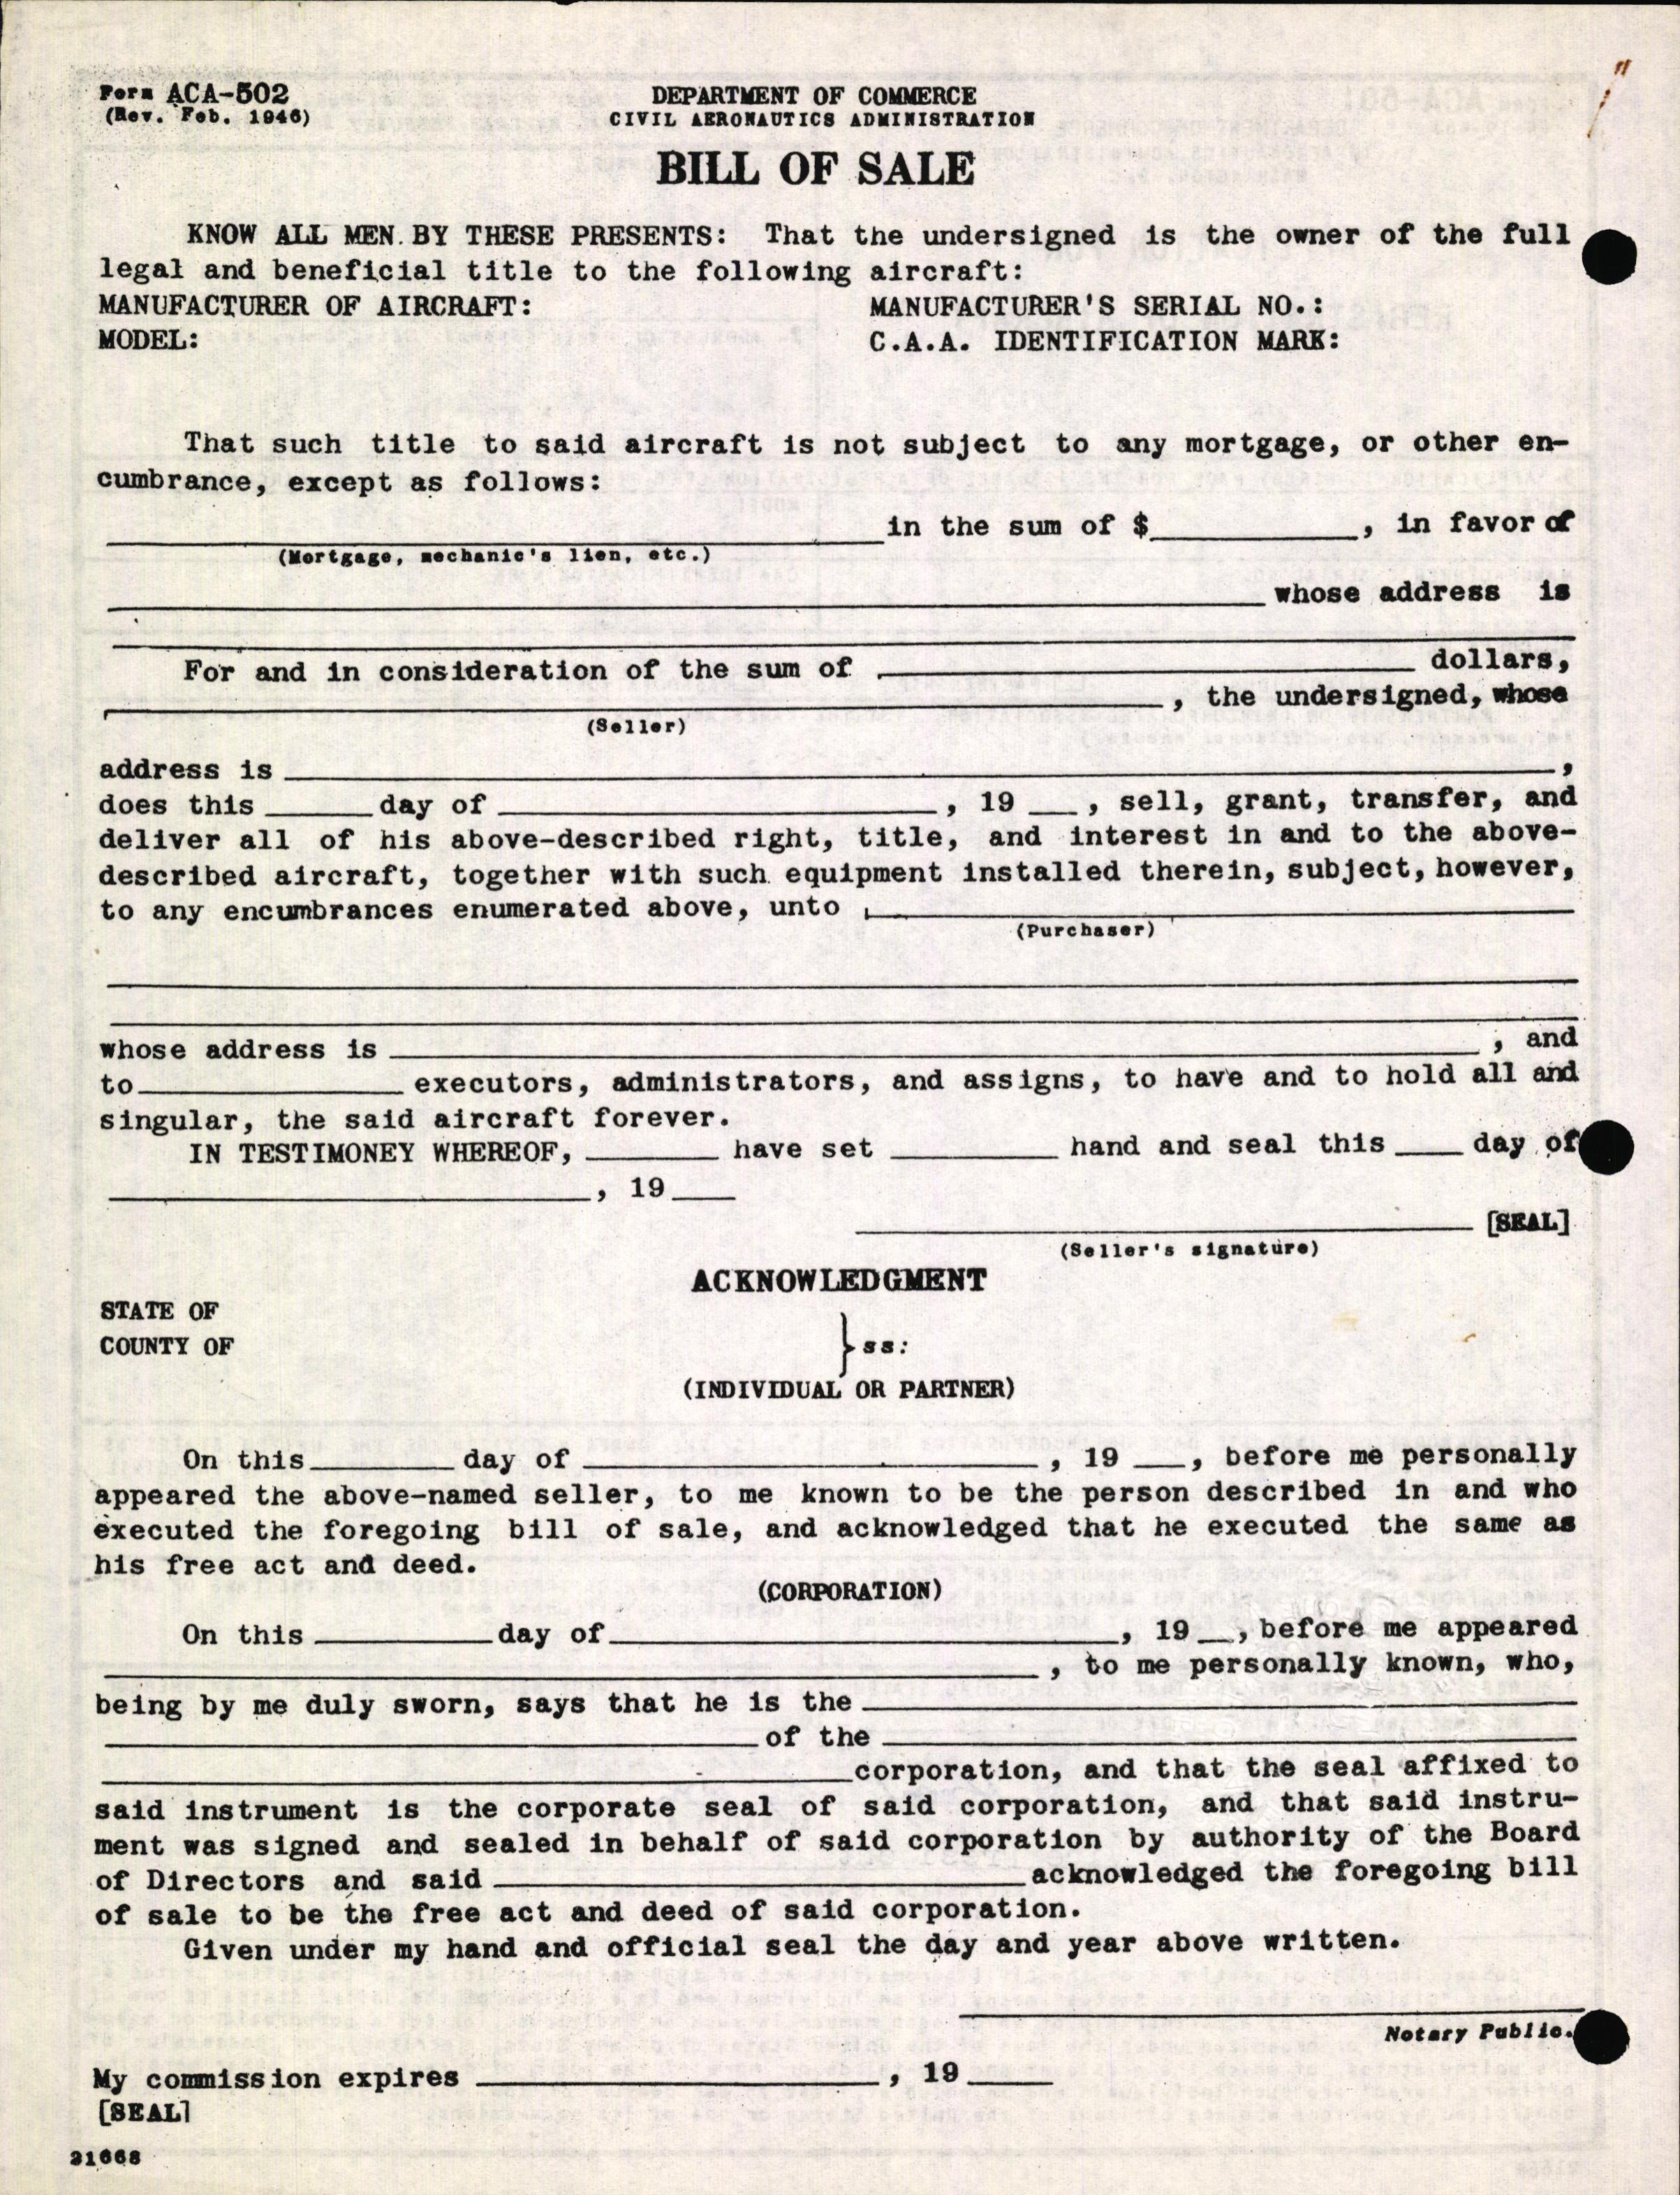 Sample page 2 from AirCorps Library document: Technical Information for Serial Number 2202